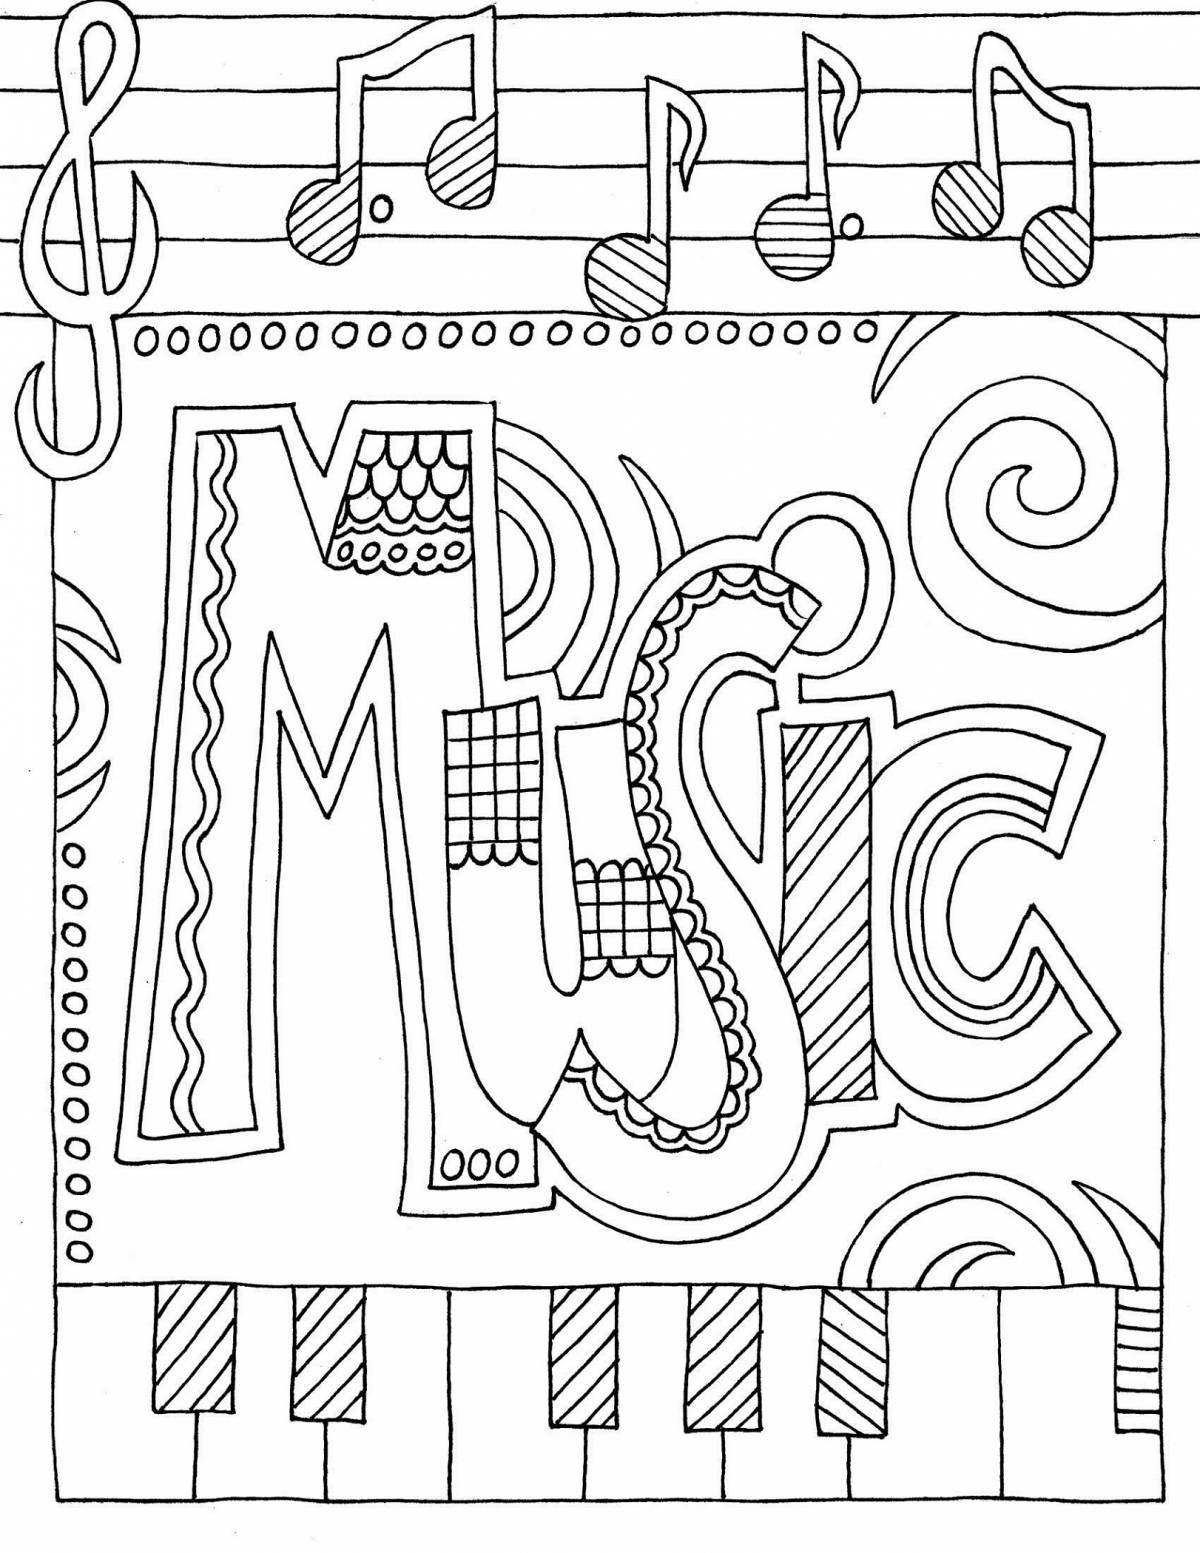 Bright musical coloring book